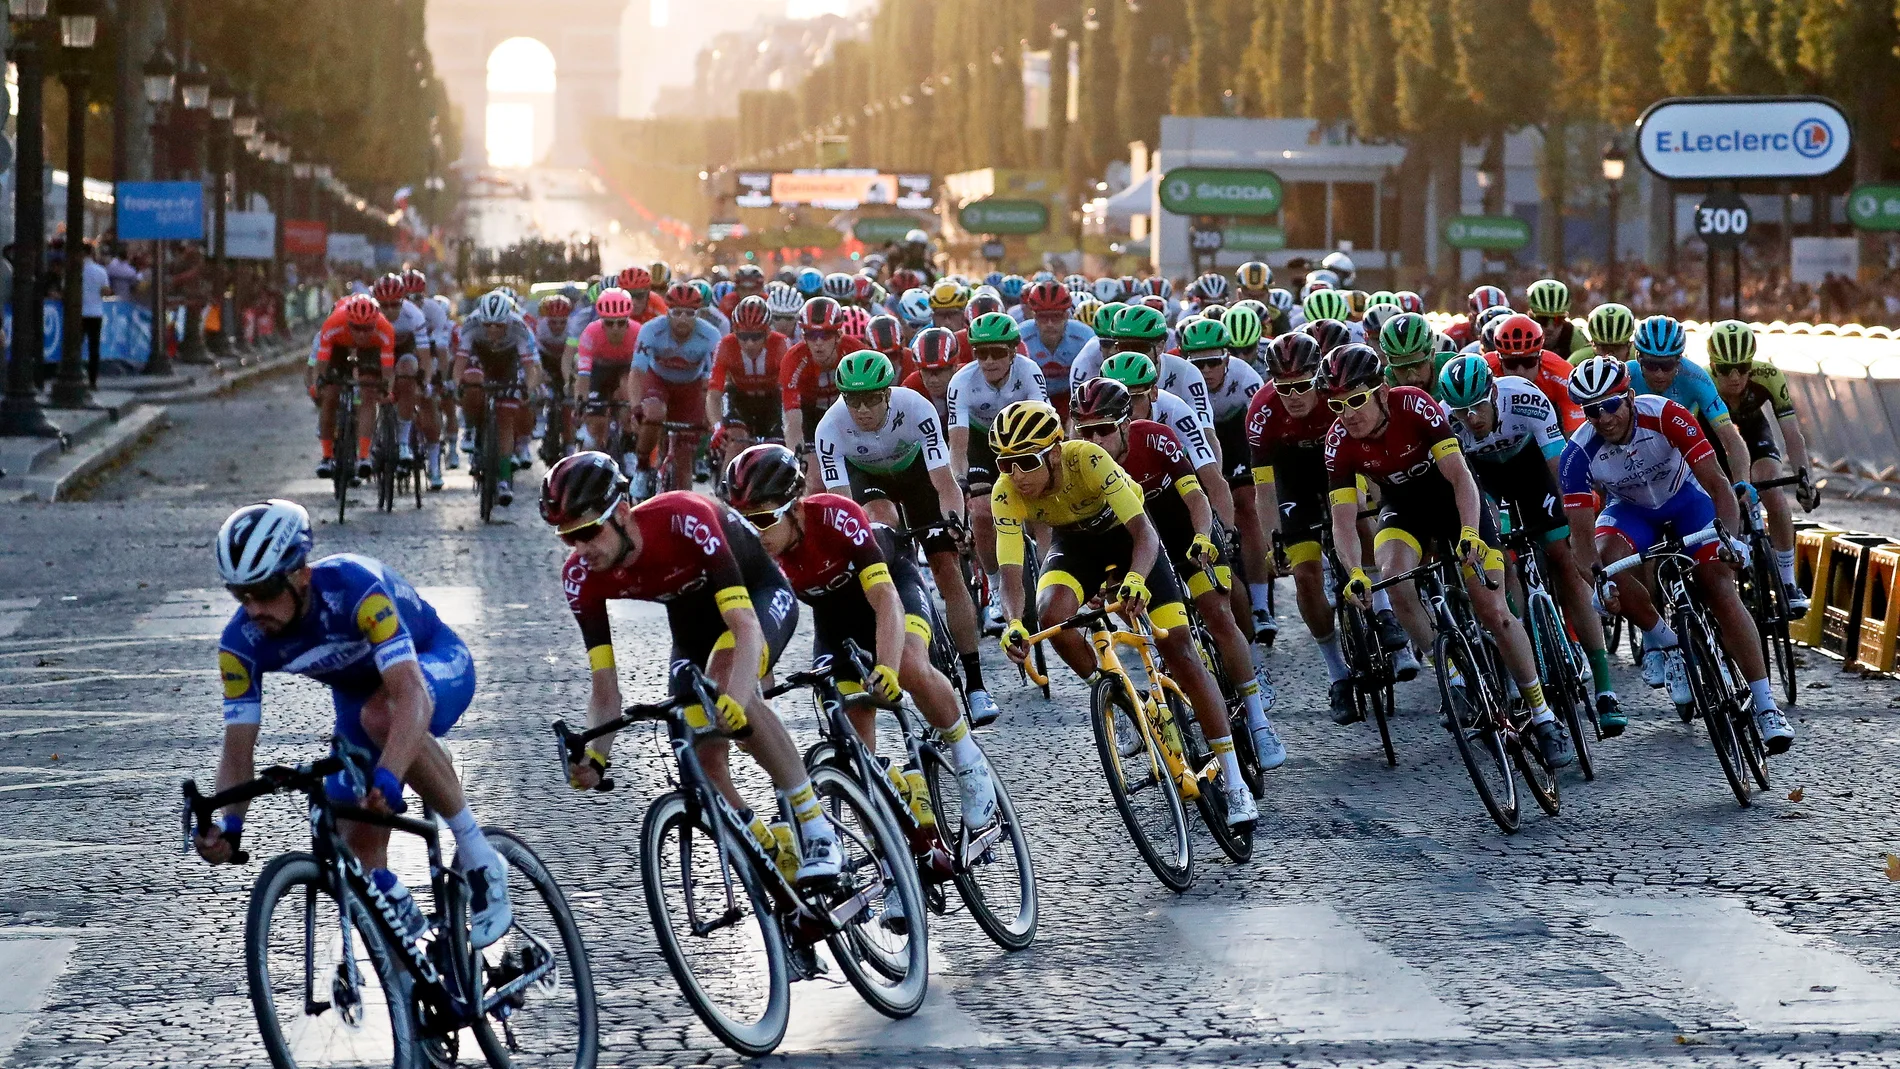 Tour de France 2020 might be postponed, as media reports